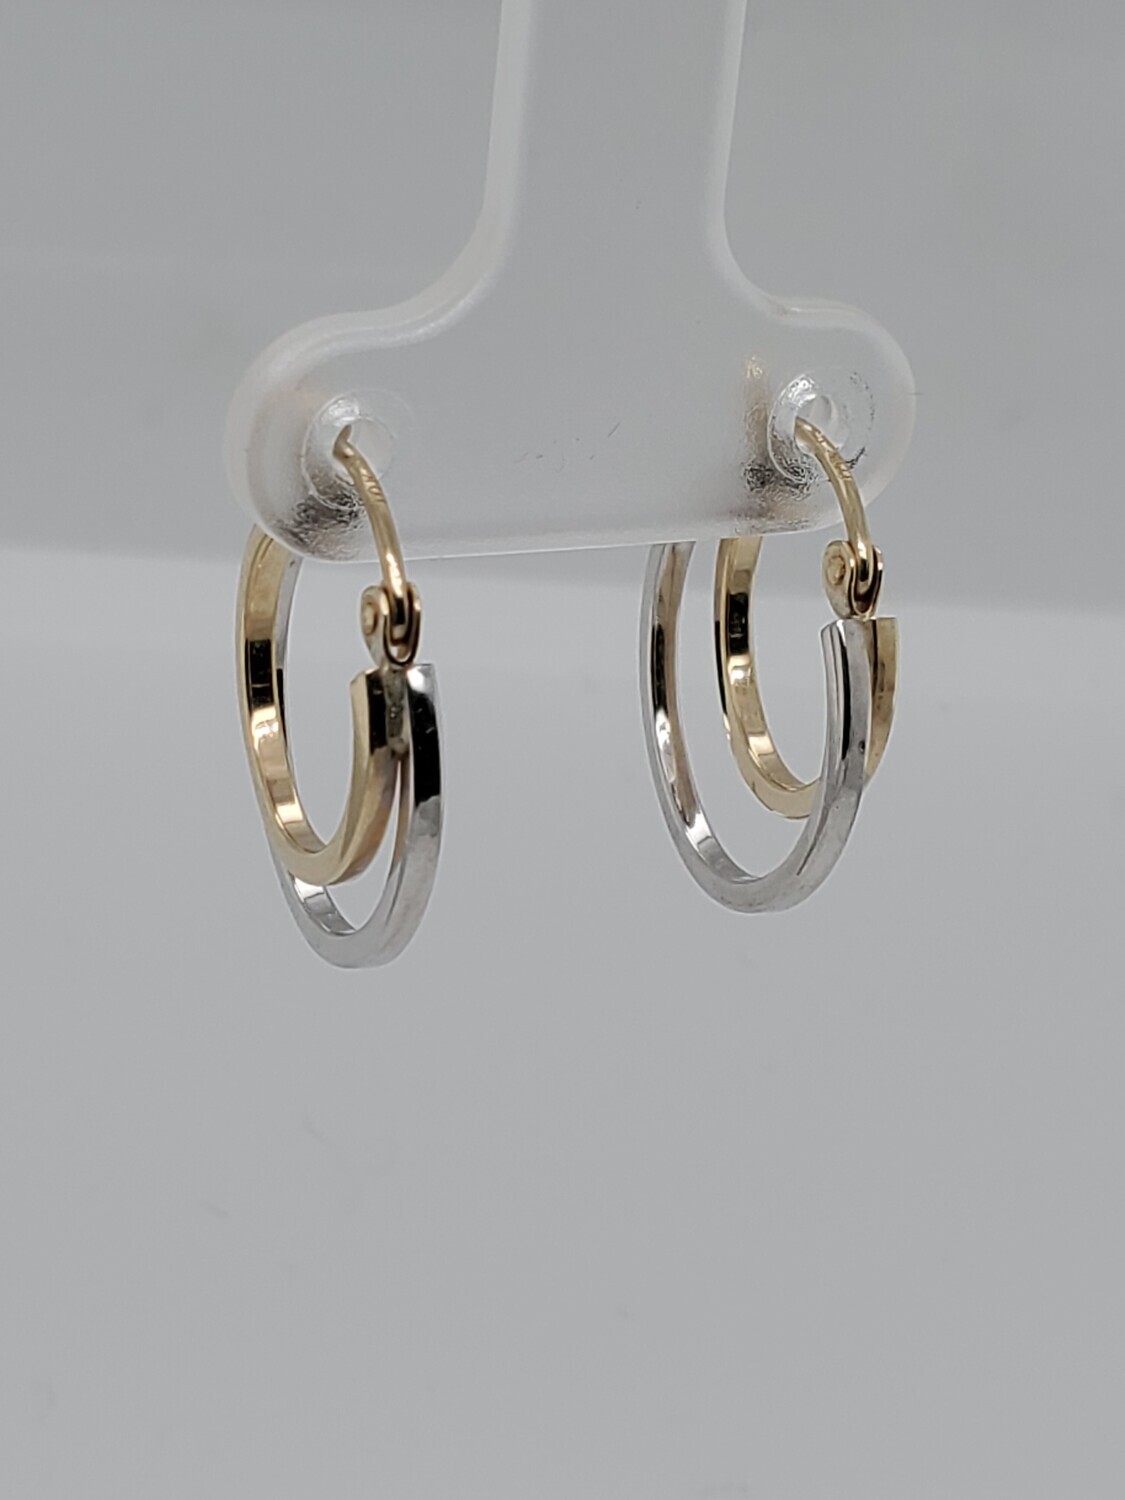 BRAND NEW!! 10KT TWO TONE DOUBLE HOOP EARRINGS  INVENTORY # I-15981 75TH AVE